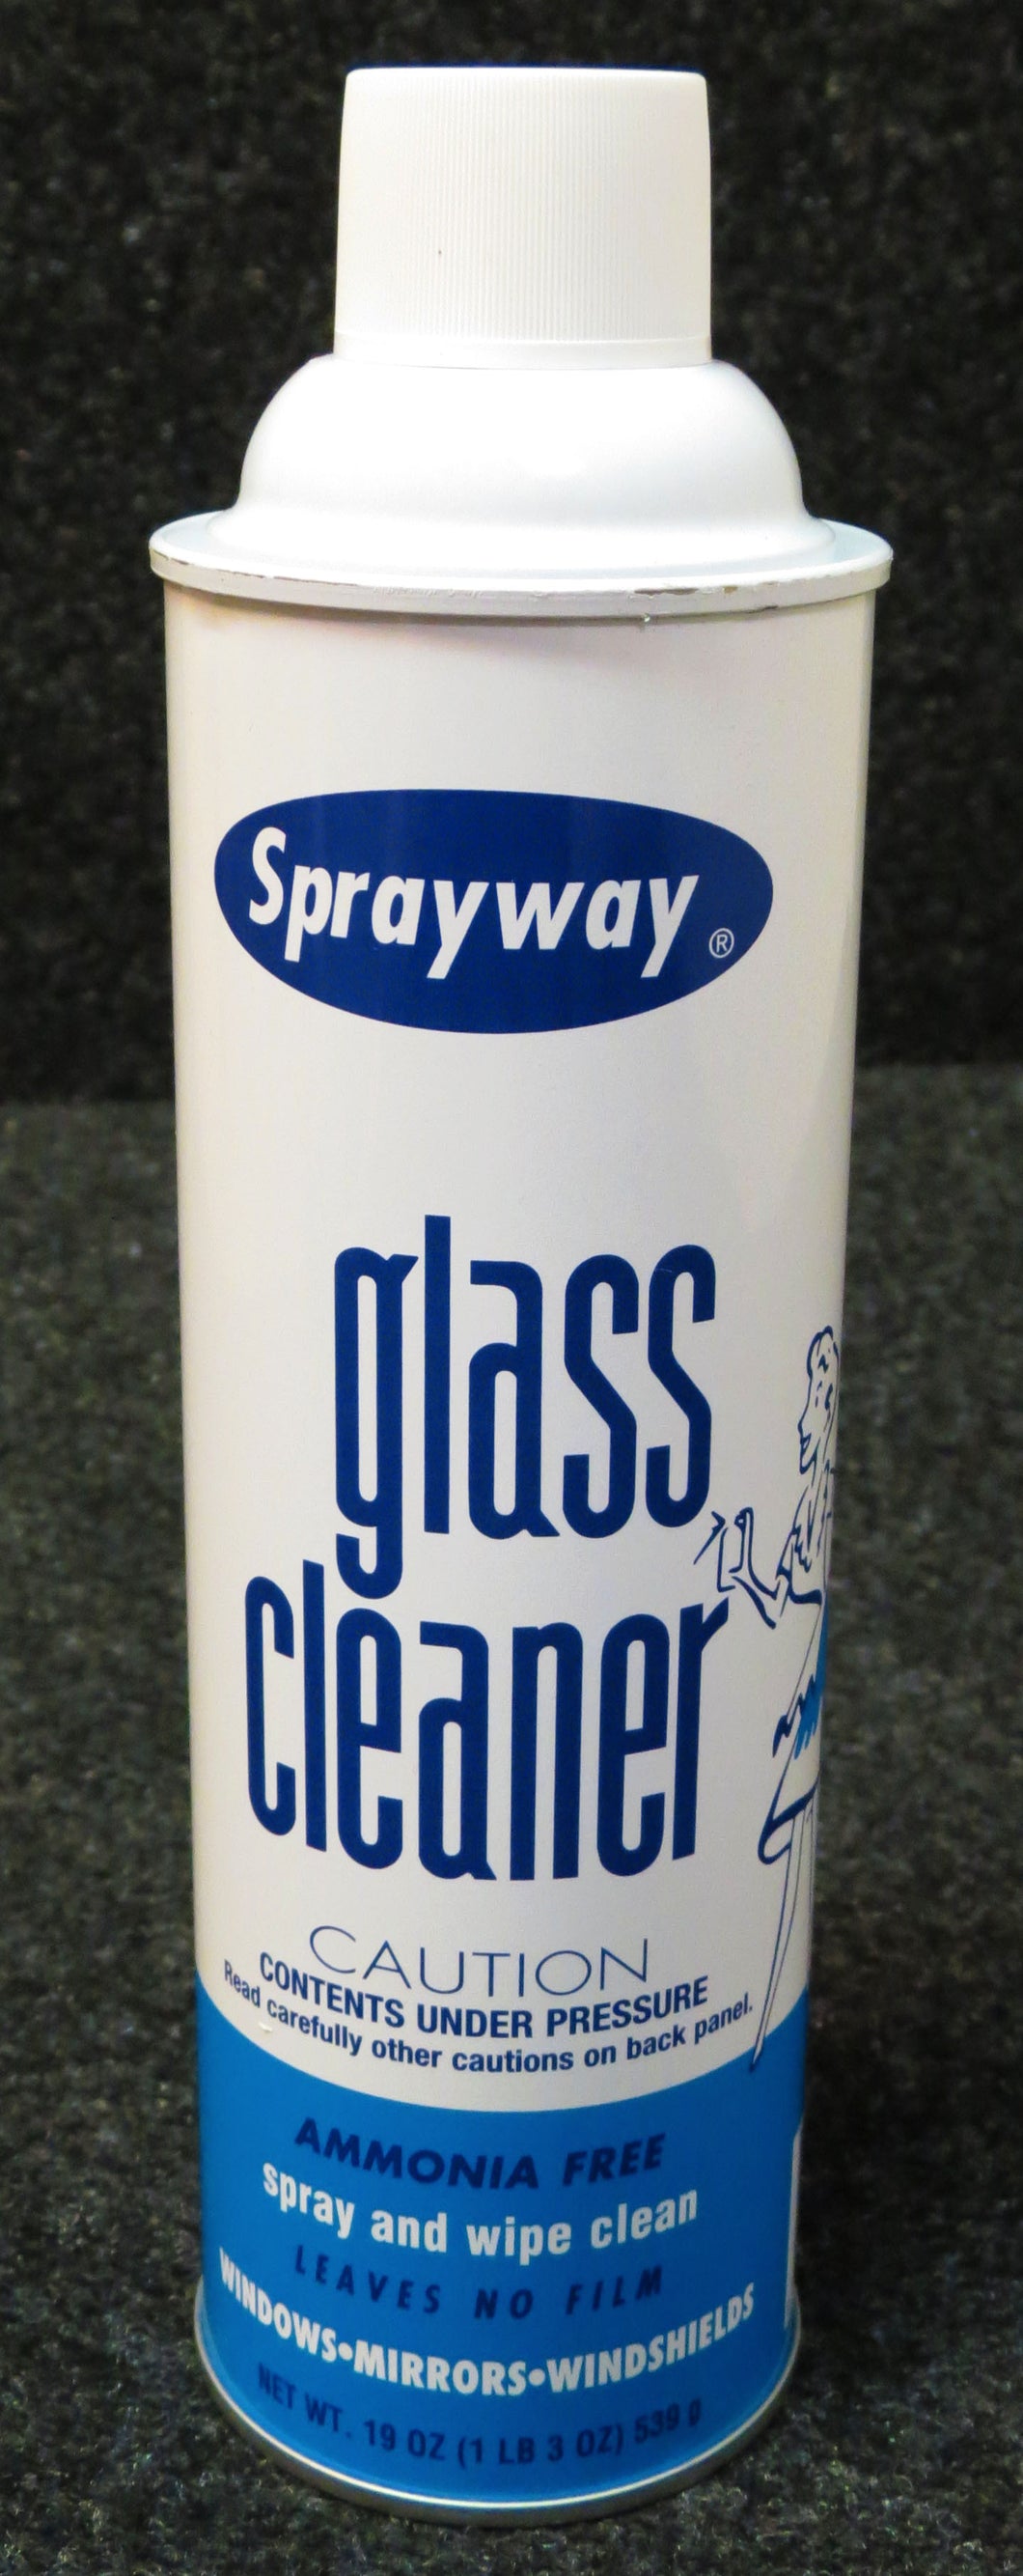 Sprayway Glass Cleaner Review 